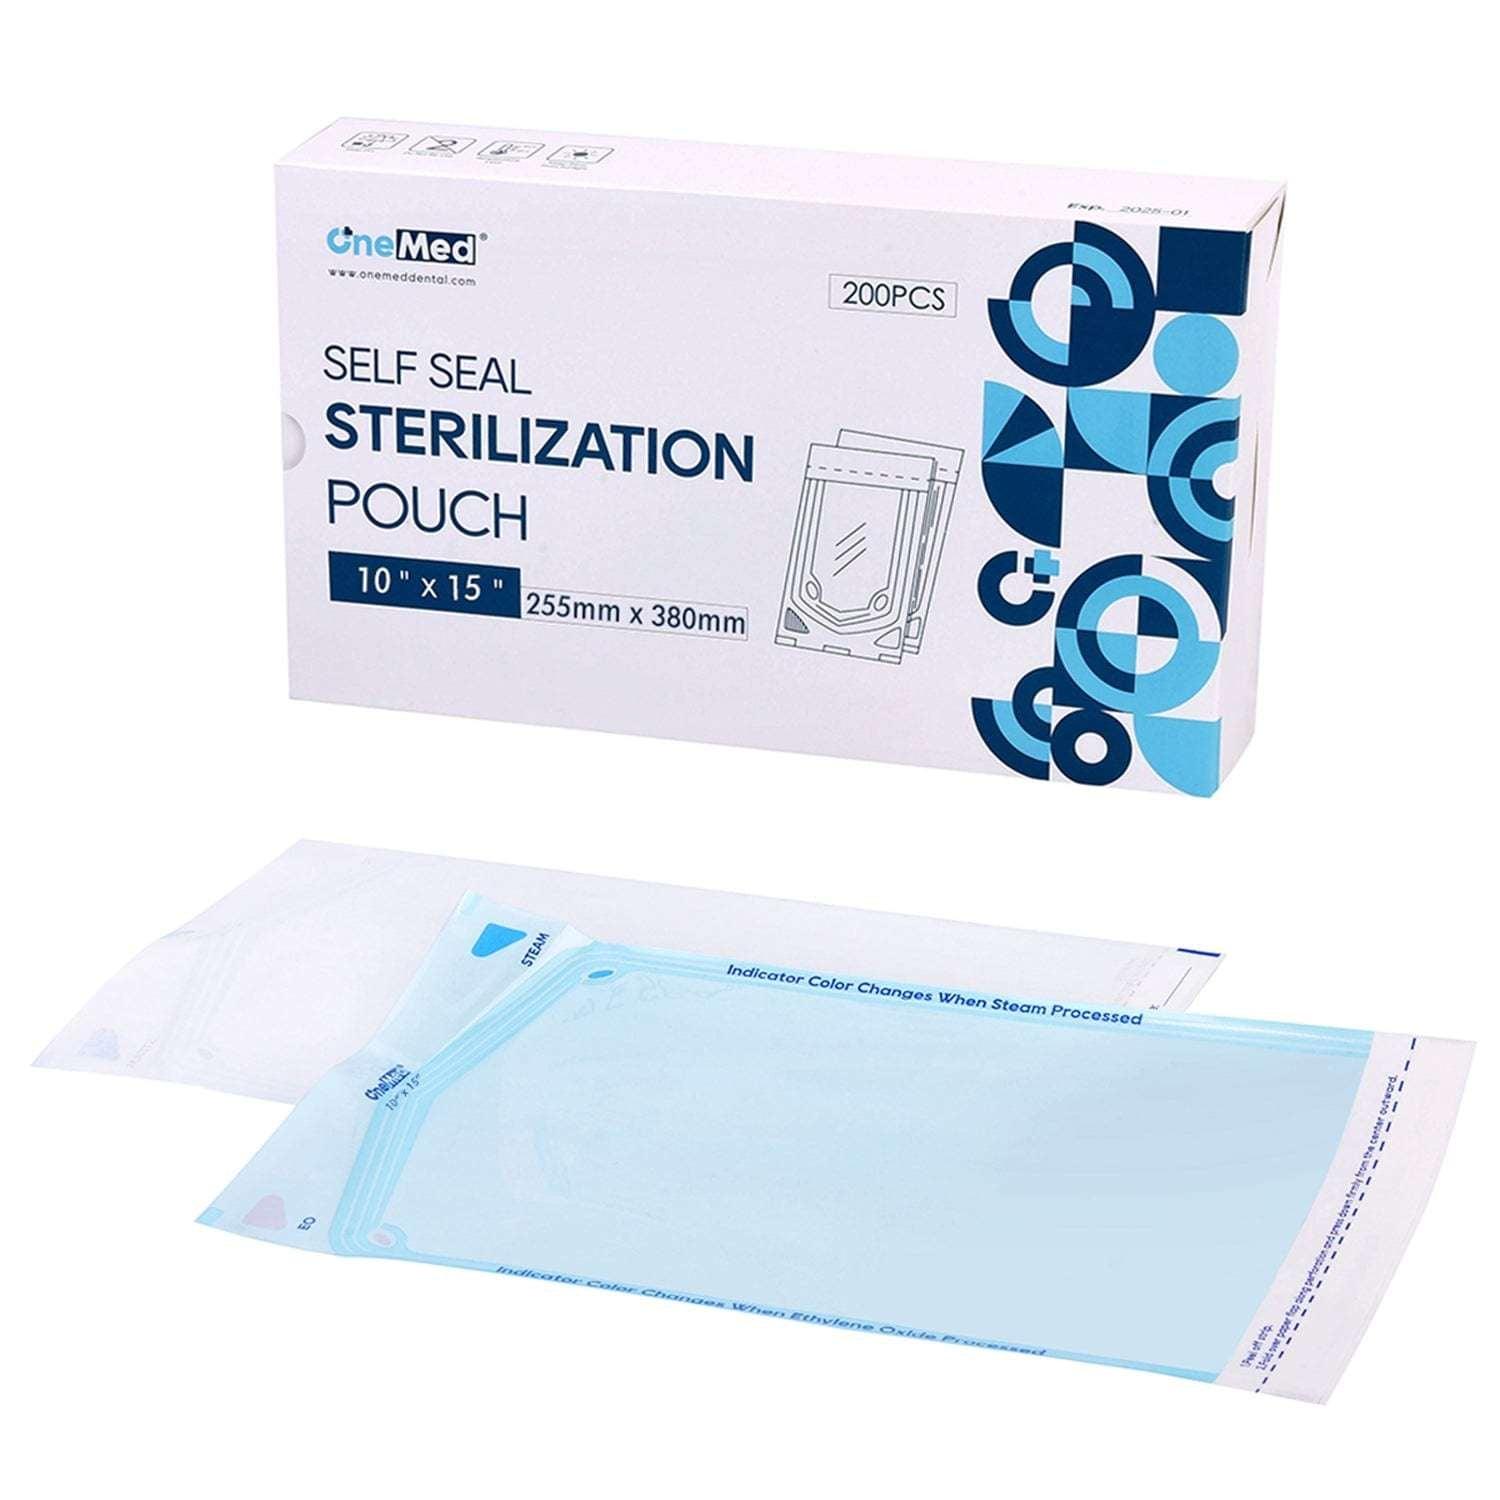 OneMed Dental Self-Sealing Sterilization Pouches 10x15 inch 200/Box - OneMed Dental